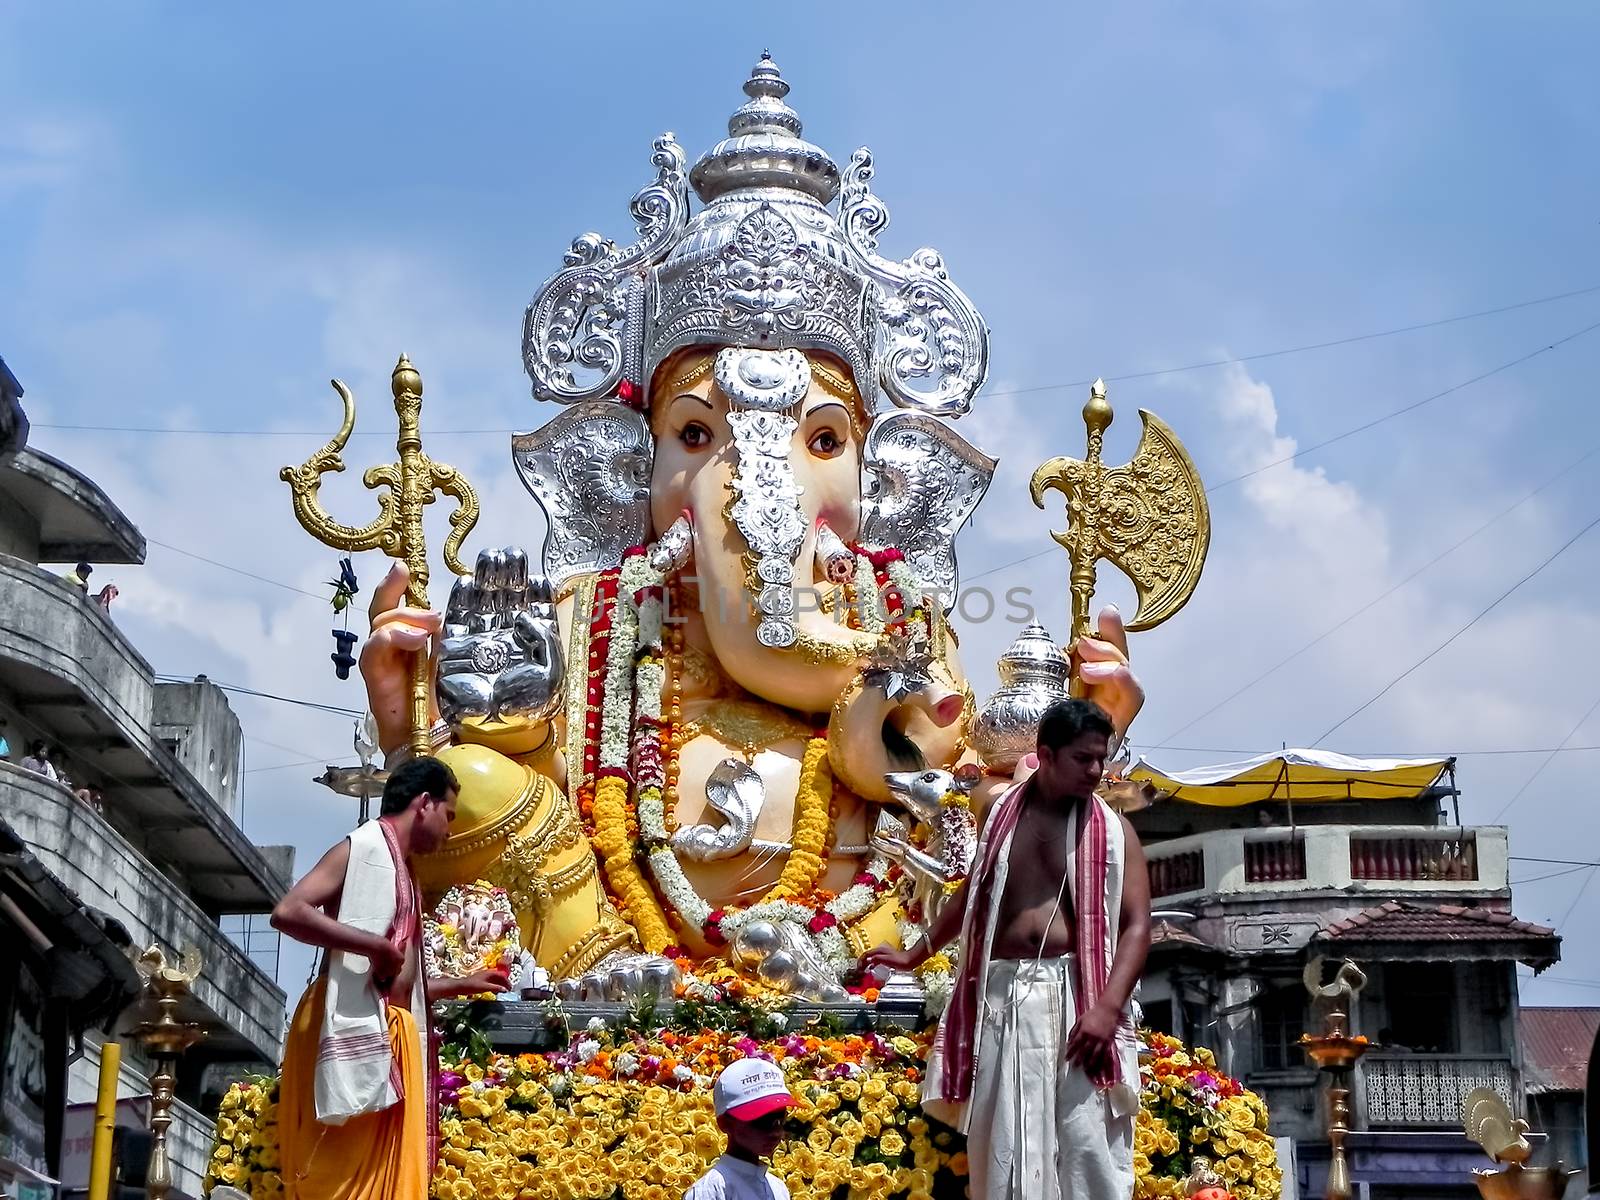 Decorated & garlanded huge idol of Hindu God Ganesha during festival procession. by lalam